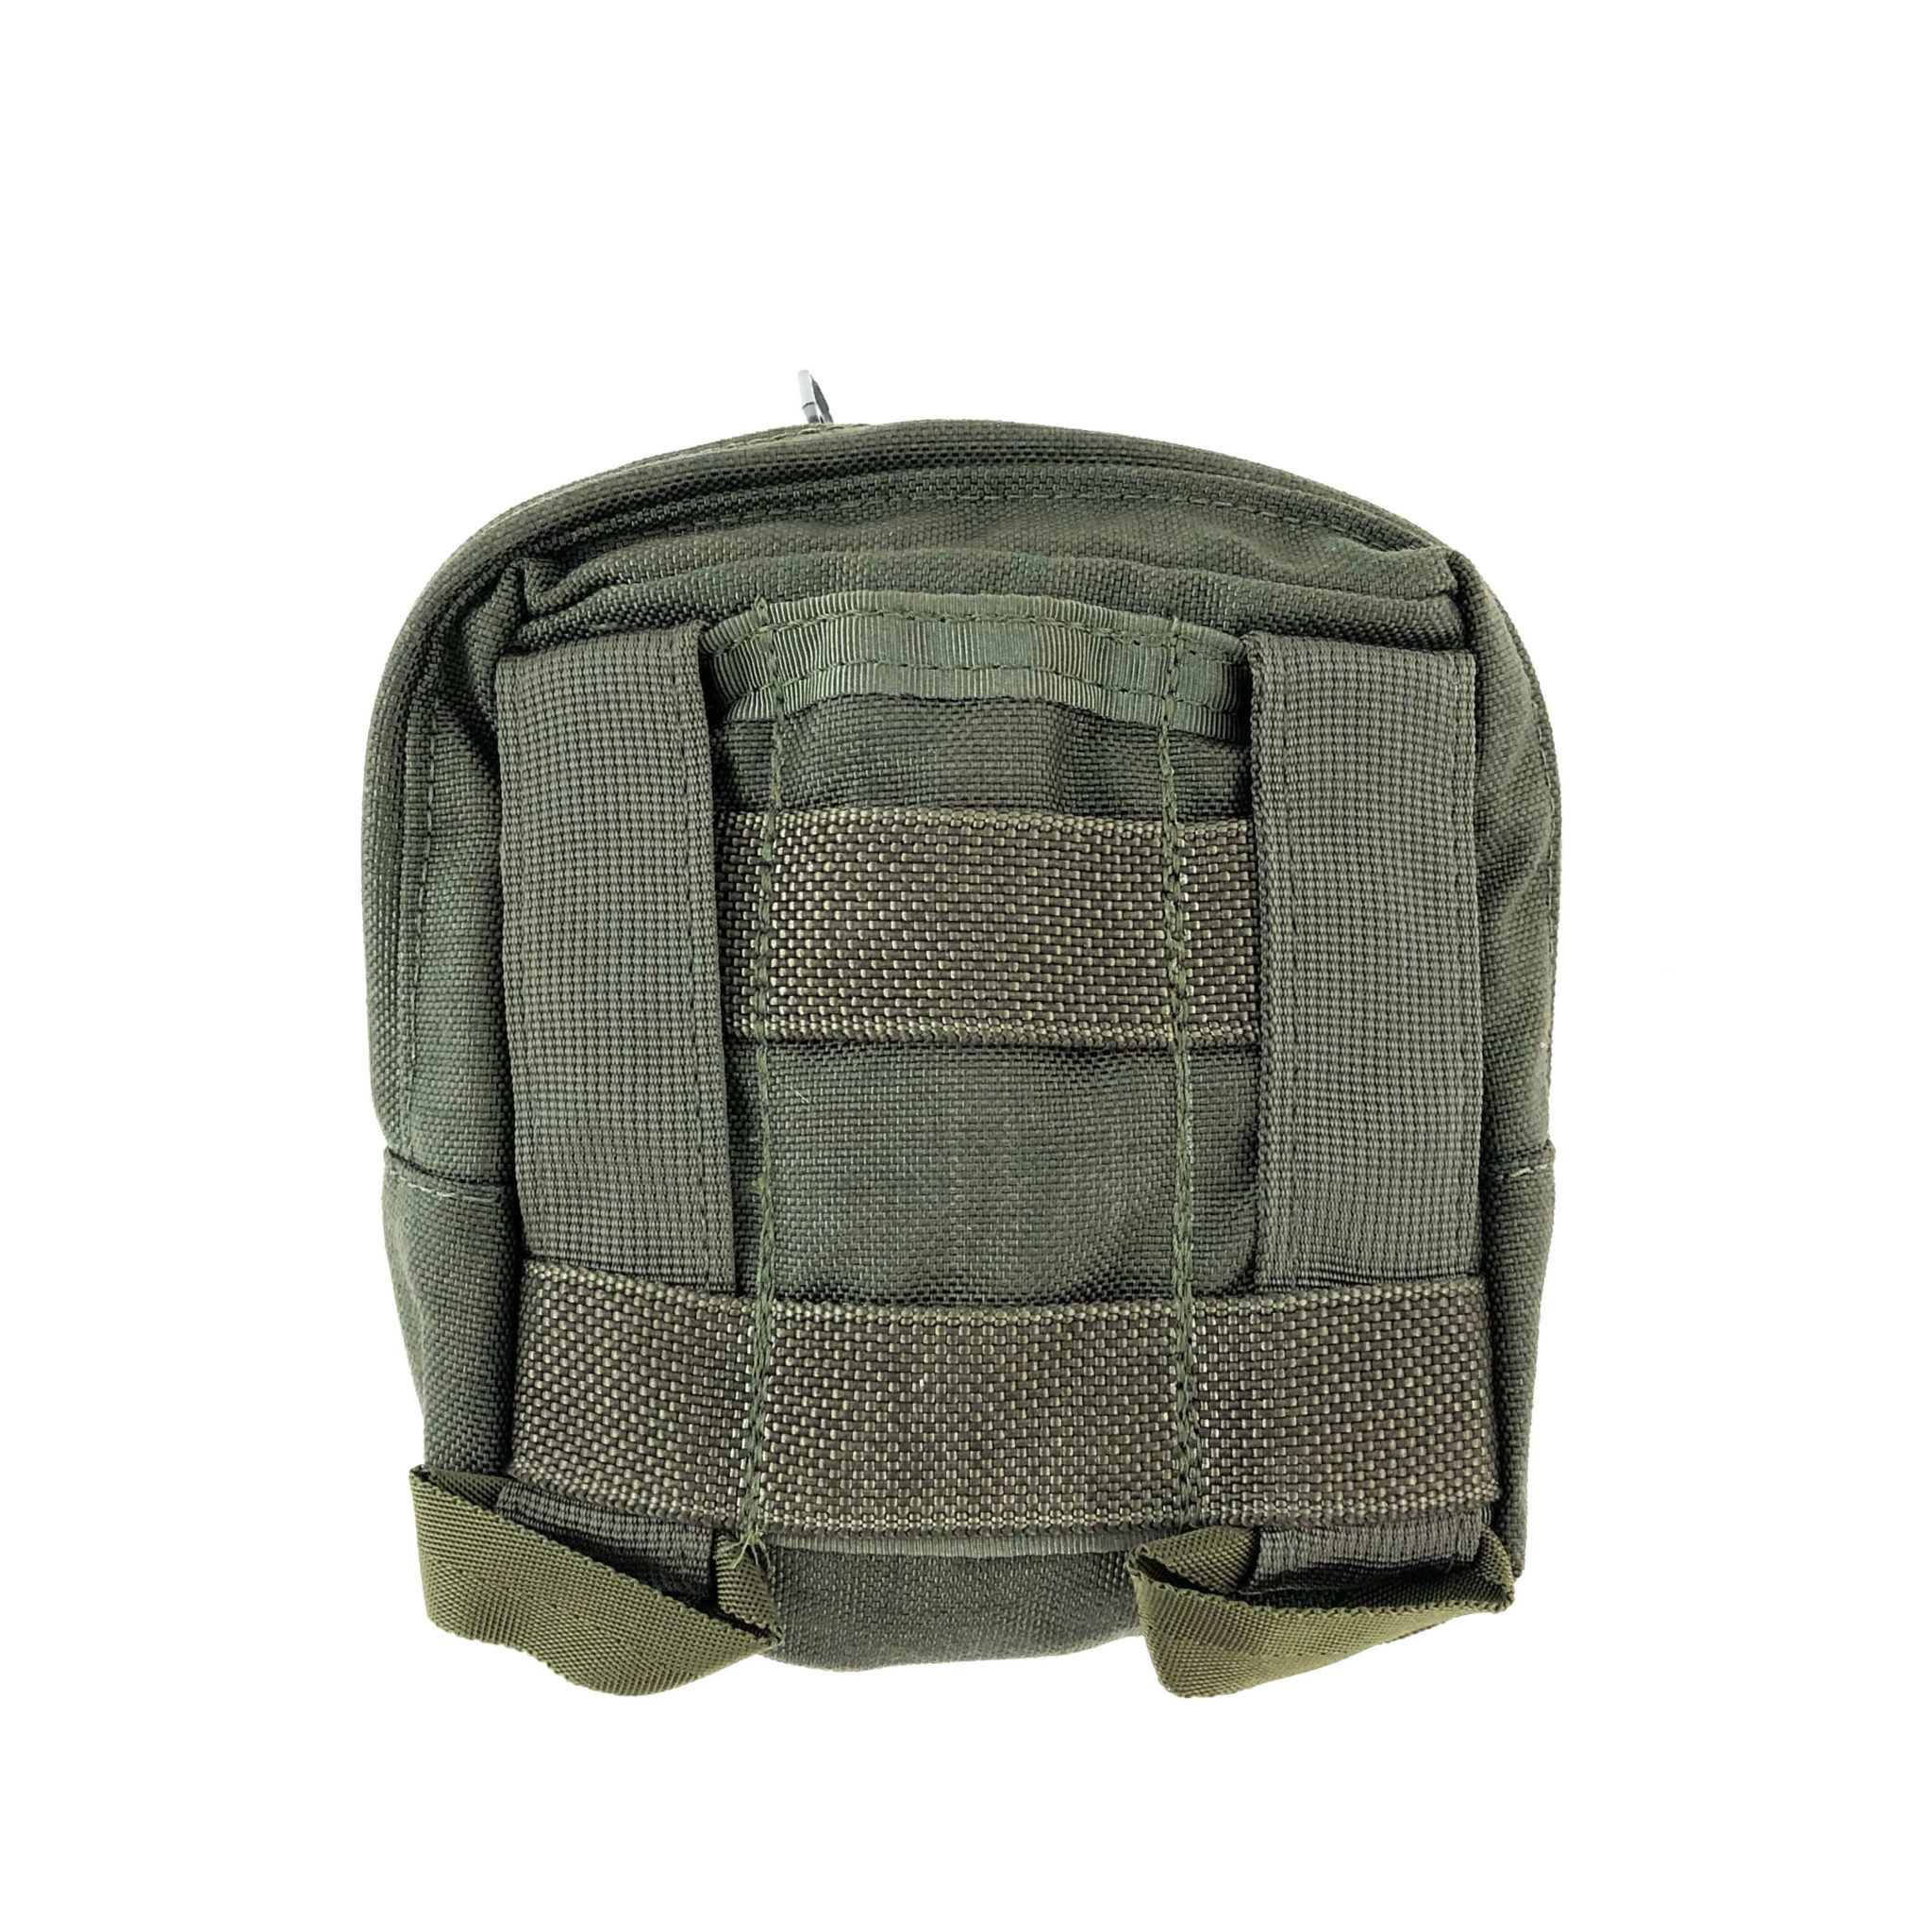 Smoke Green Paraclete Small GP Pouch - FAST Delivey of GI Surplus